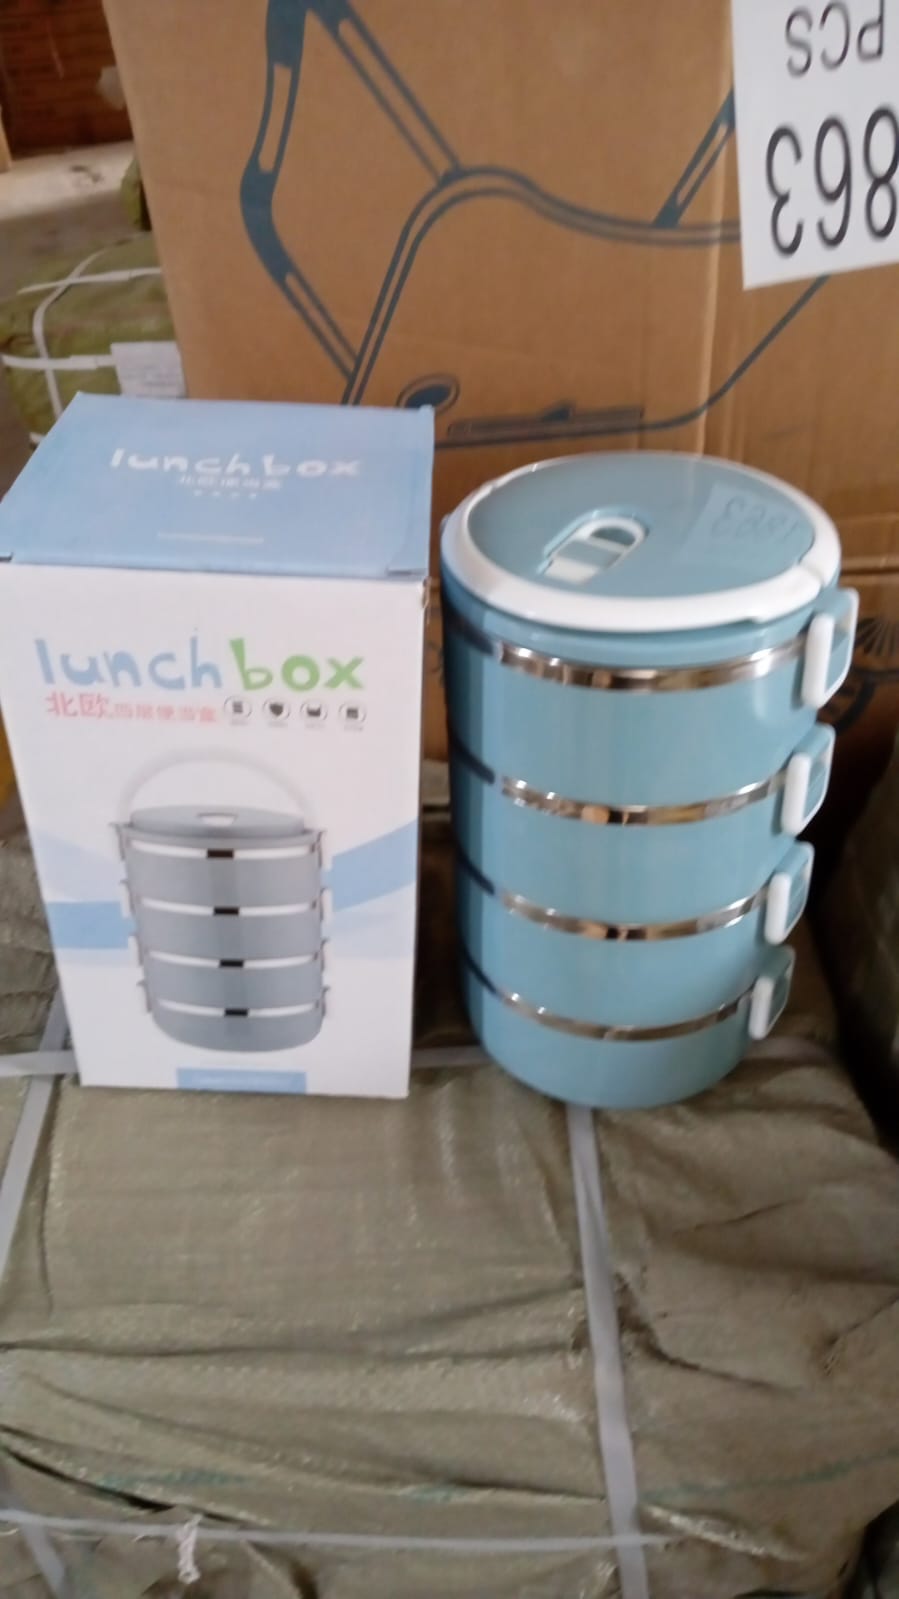 2871 Multi Layer Stainless Steel Hot Lunch Box (4 Layer)